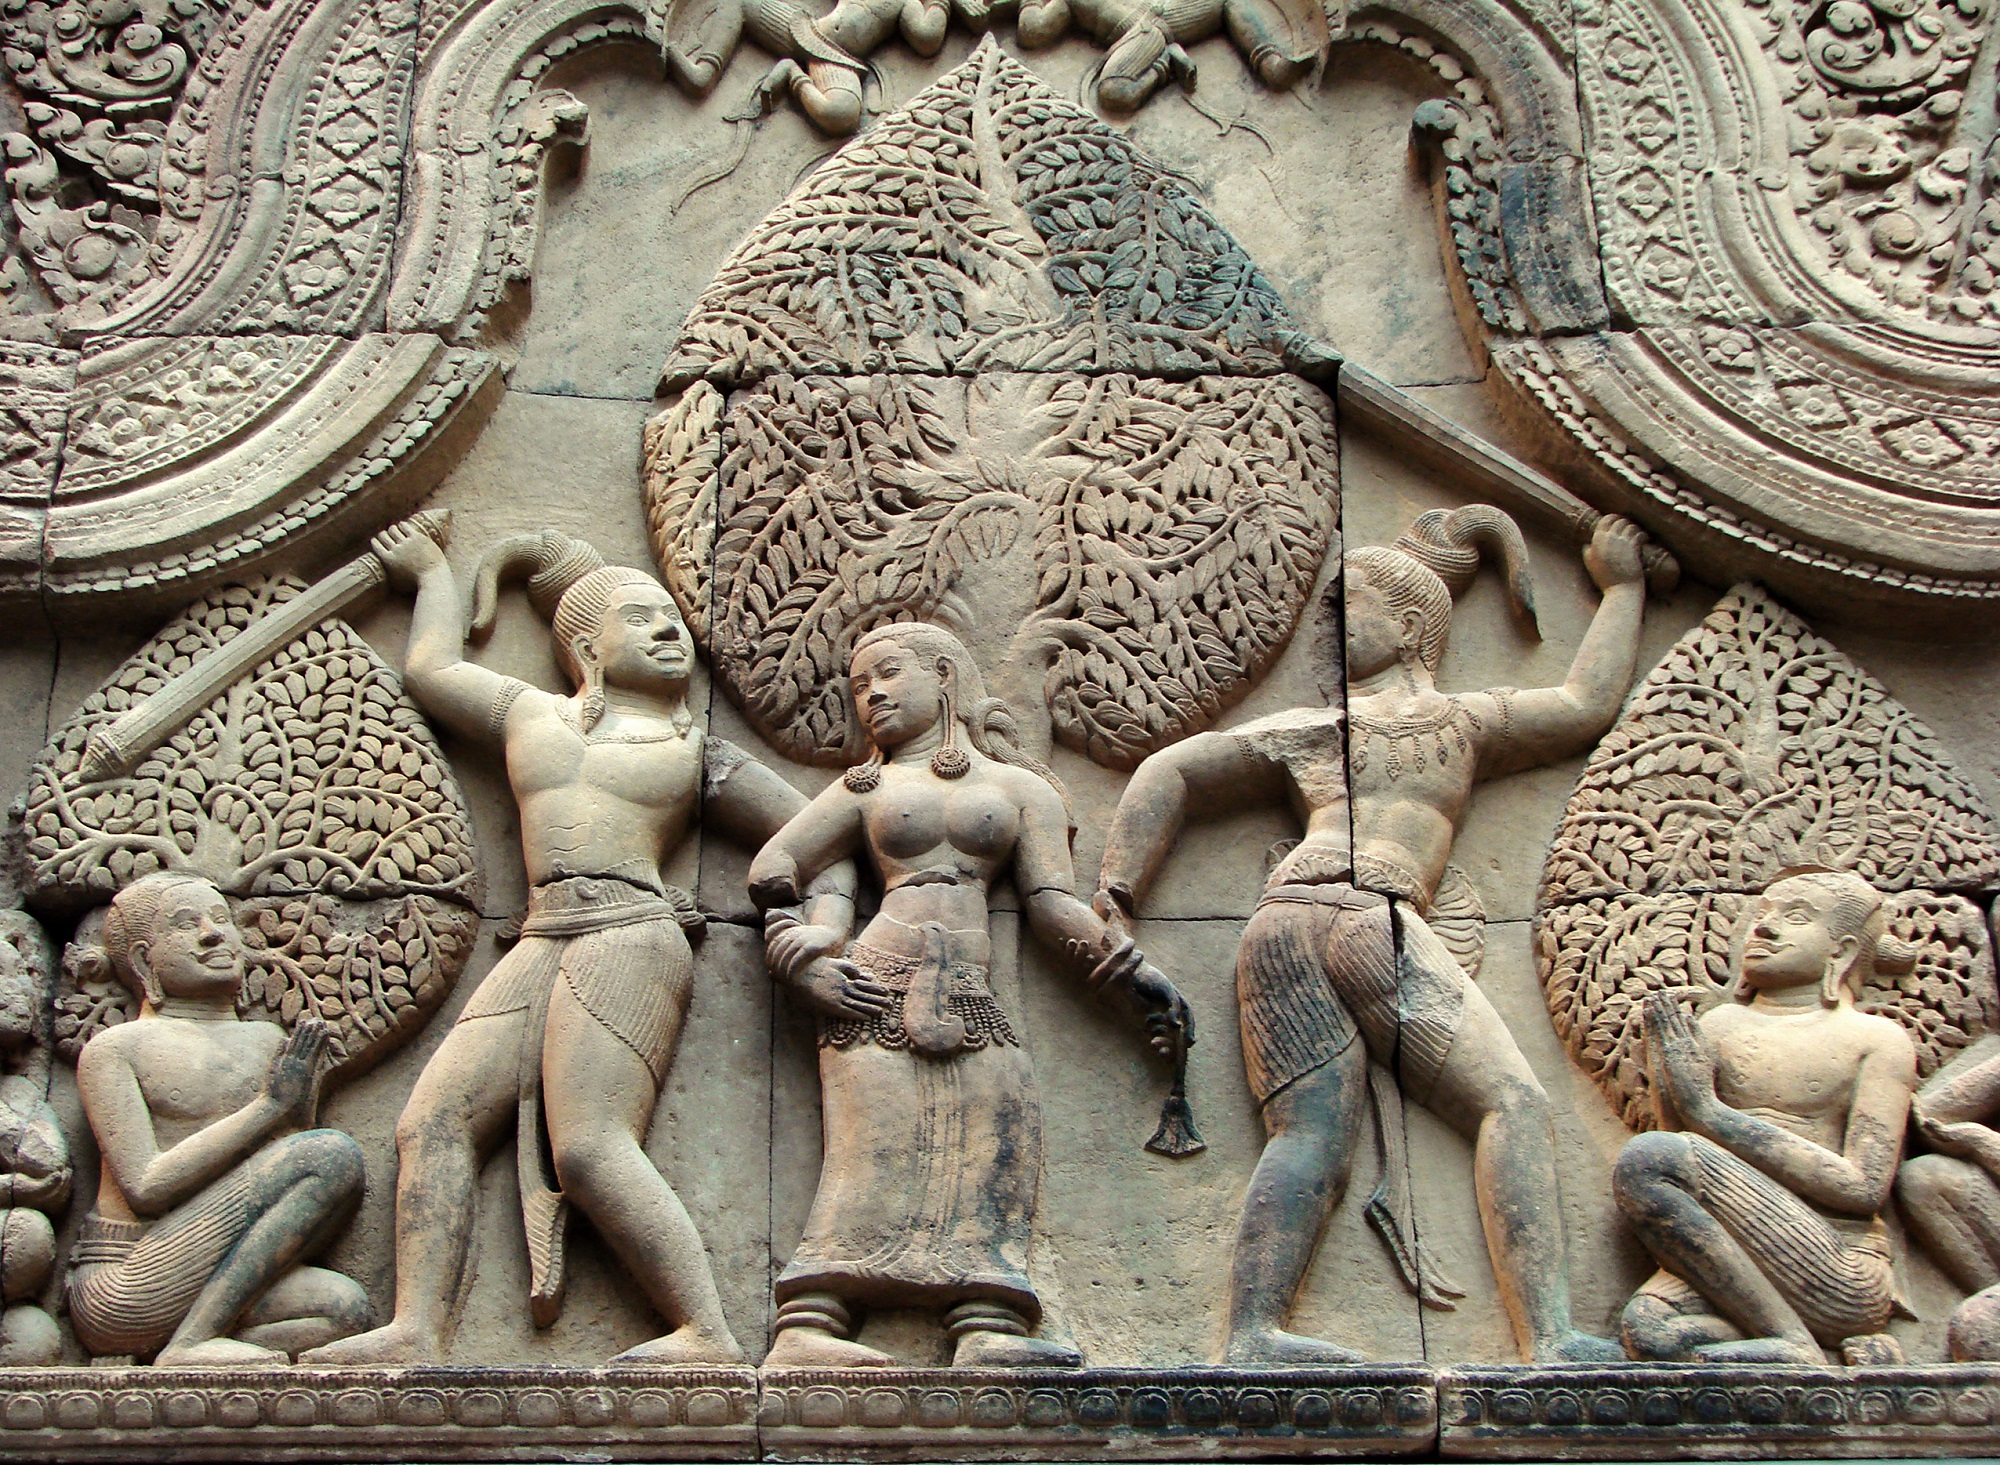 Cambodia Arts - one of the most diverse and abundant arts in Southeast